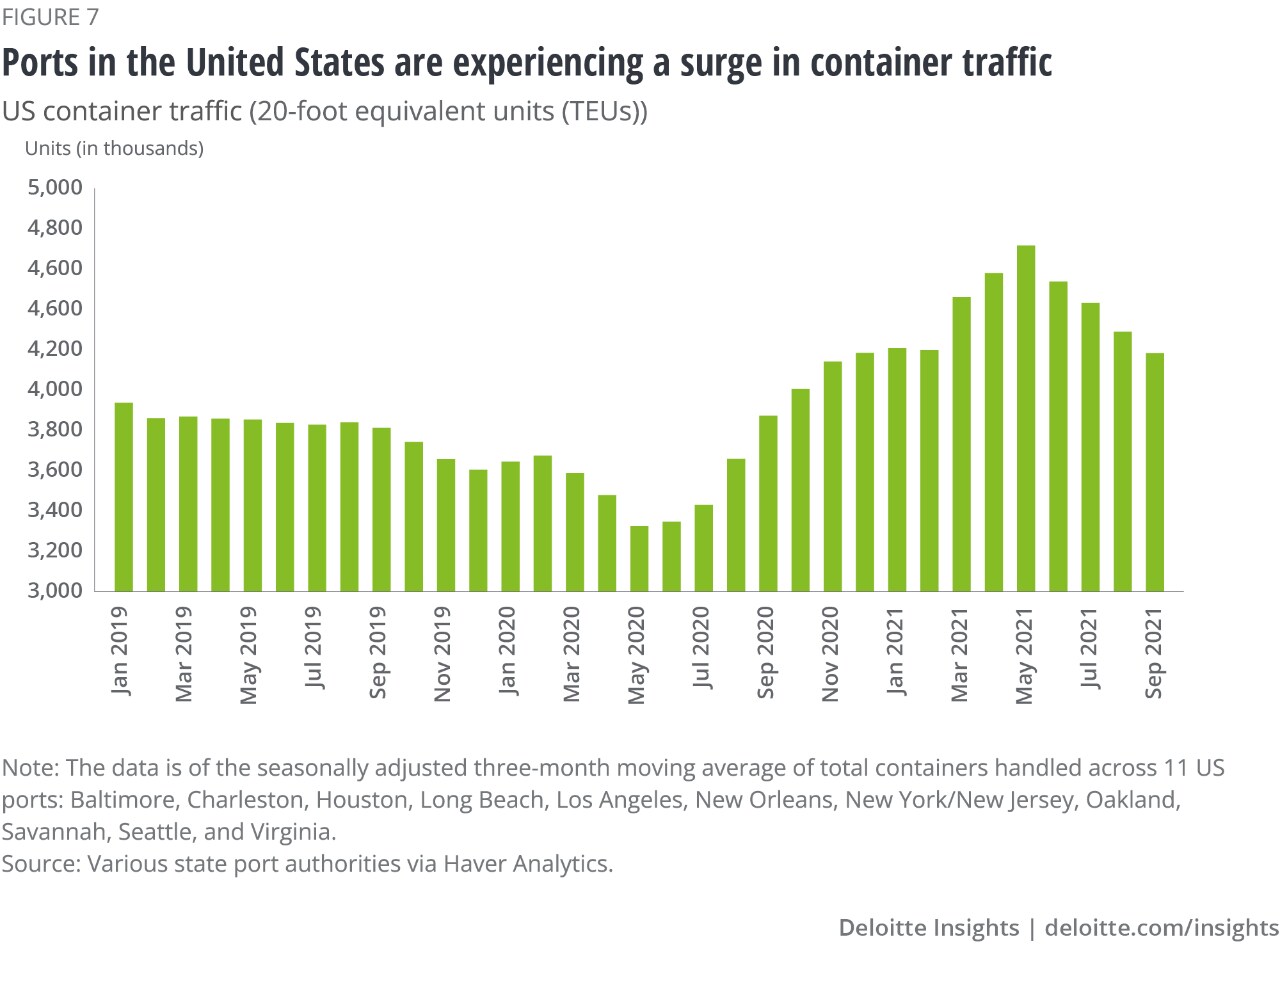 Figure 7: Ports in the United States are experiencing a surge in container traffic